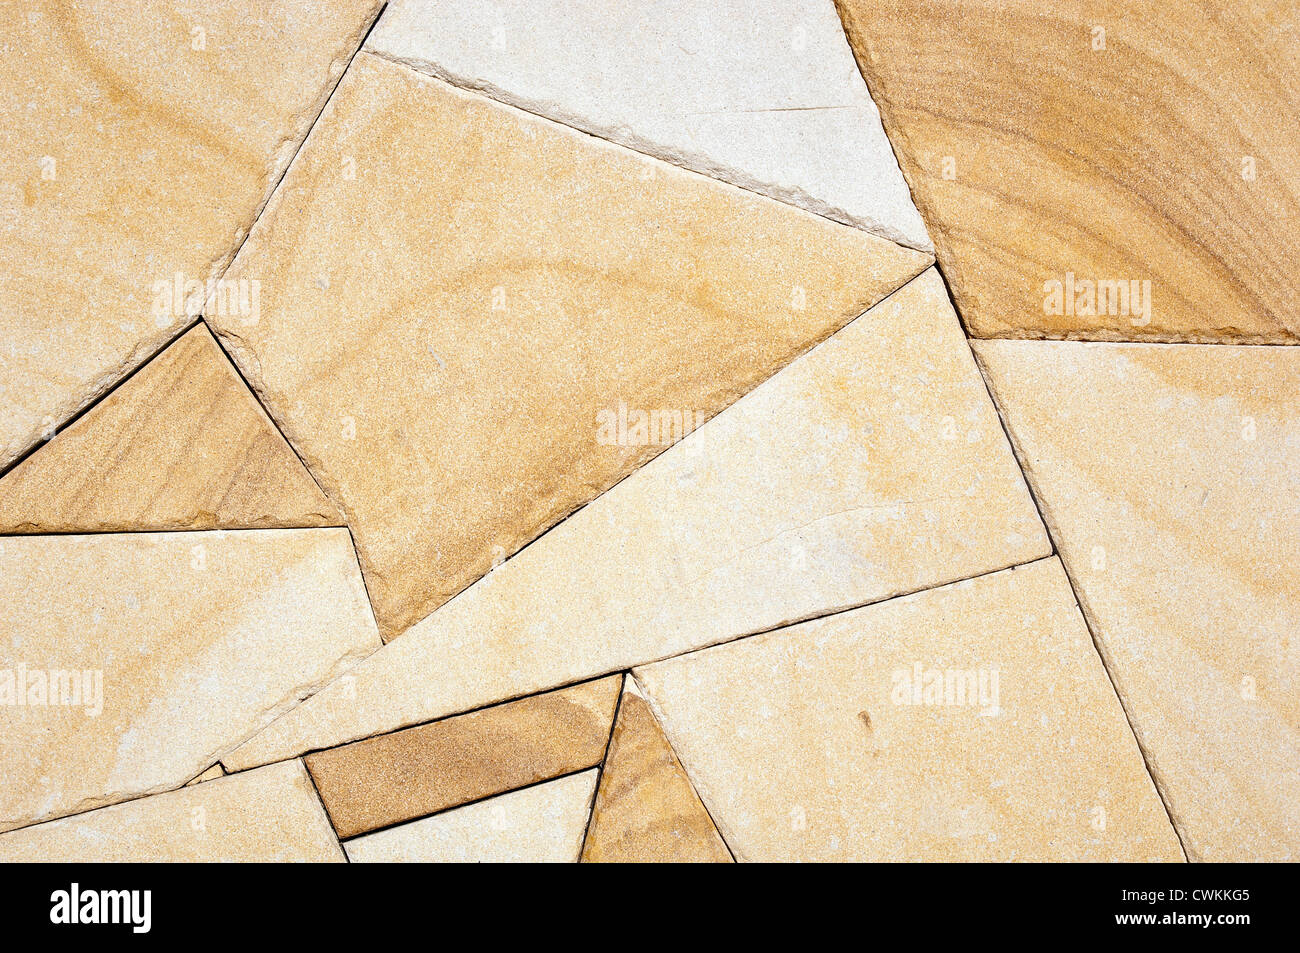 Garden paving stones in different shapes and sizes Stock Photo